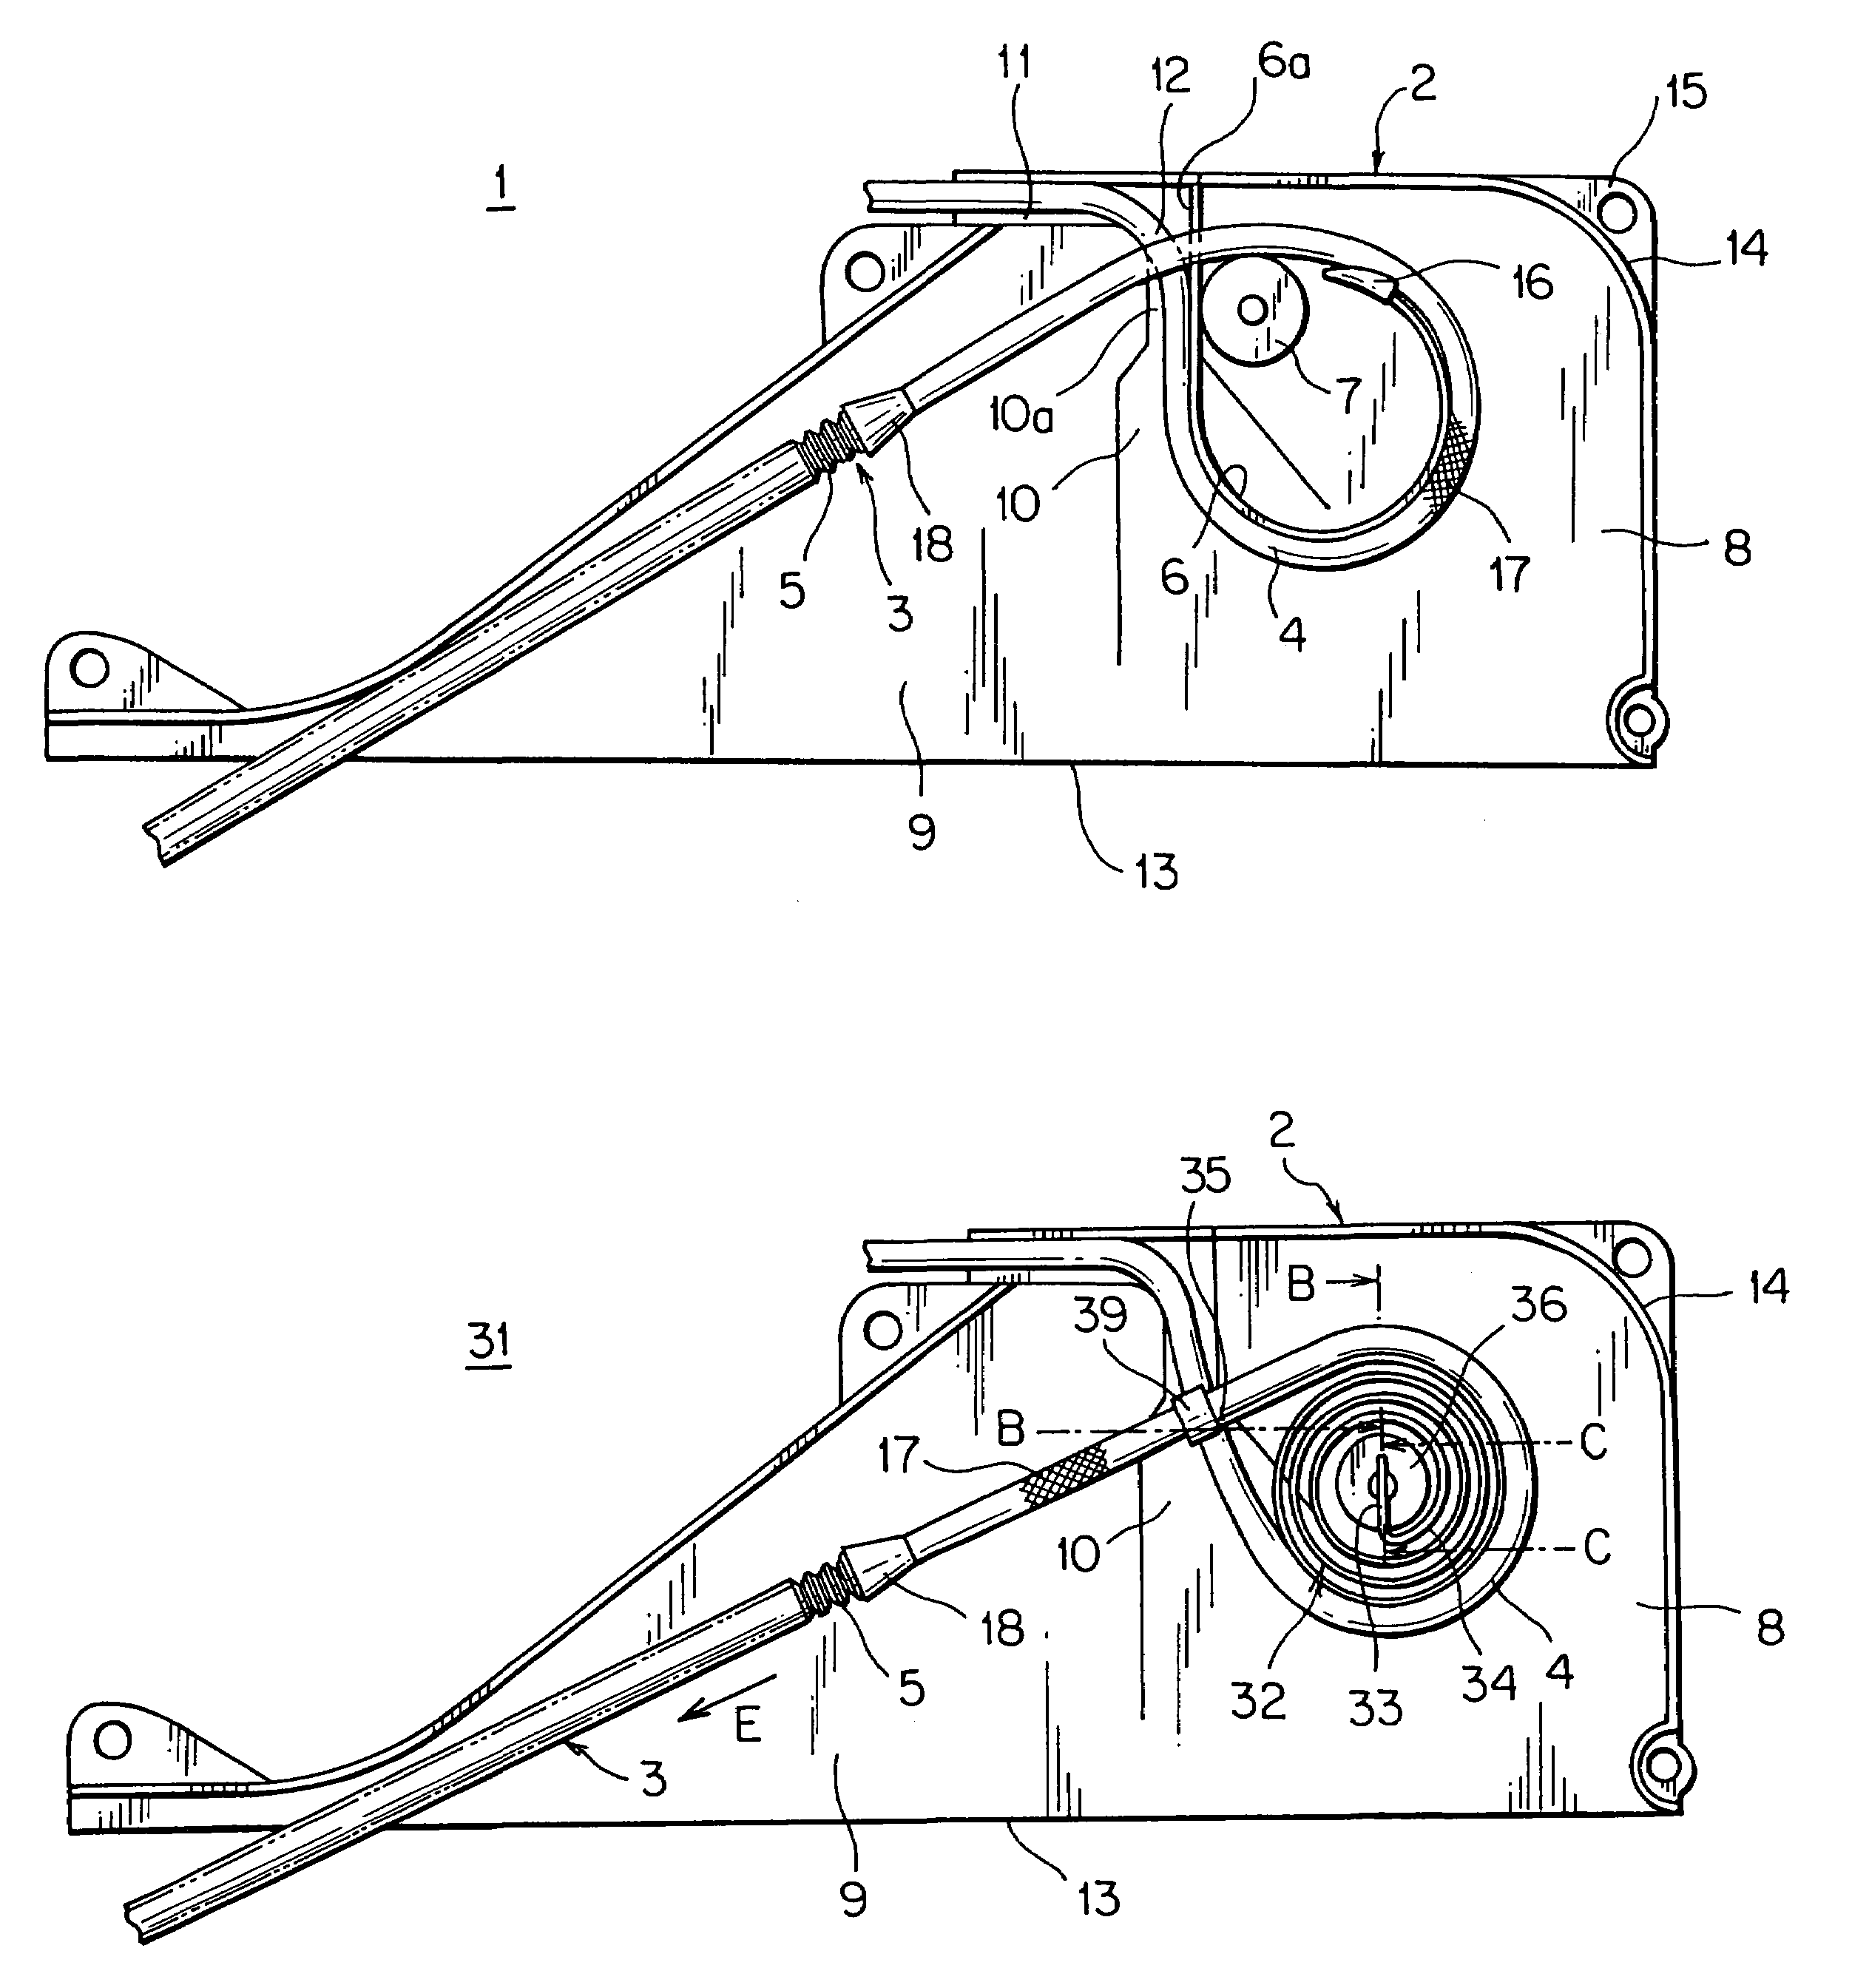 Continuous electric power supply device